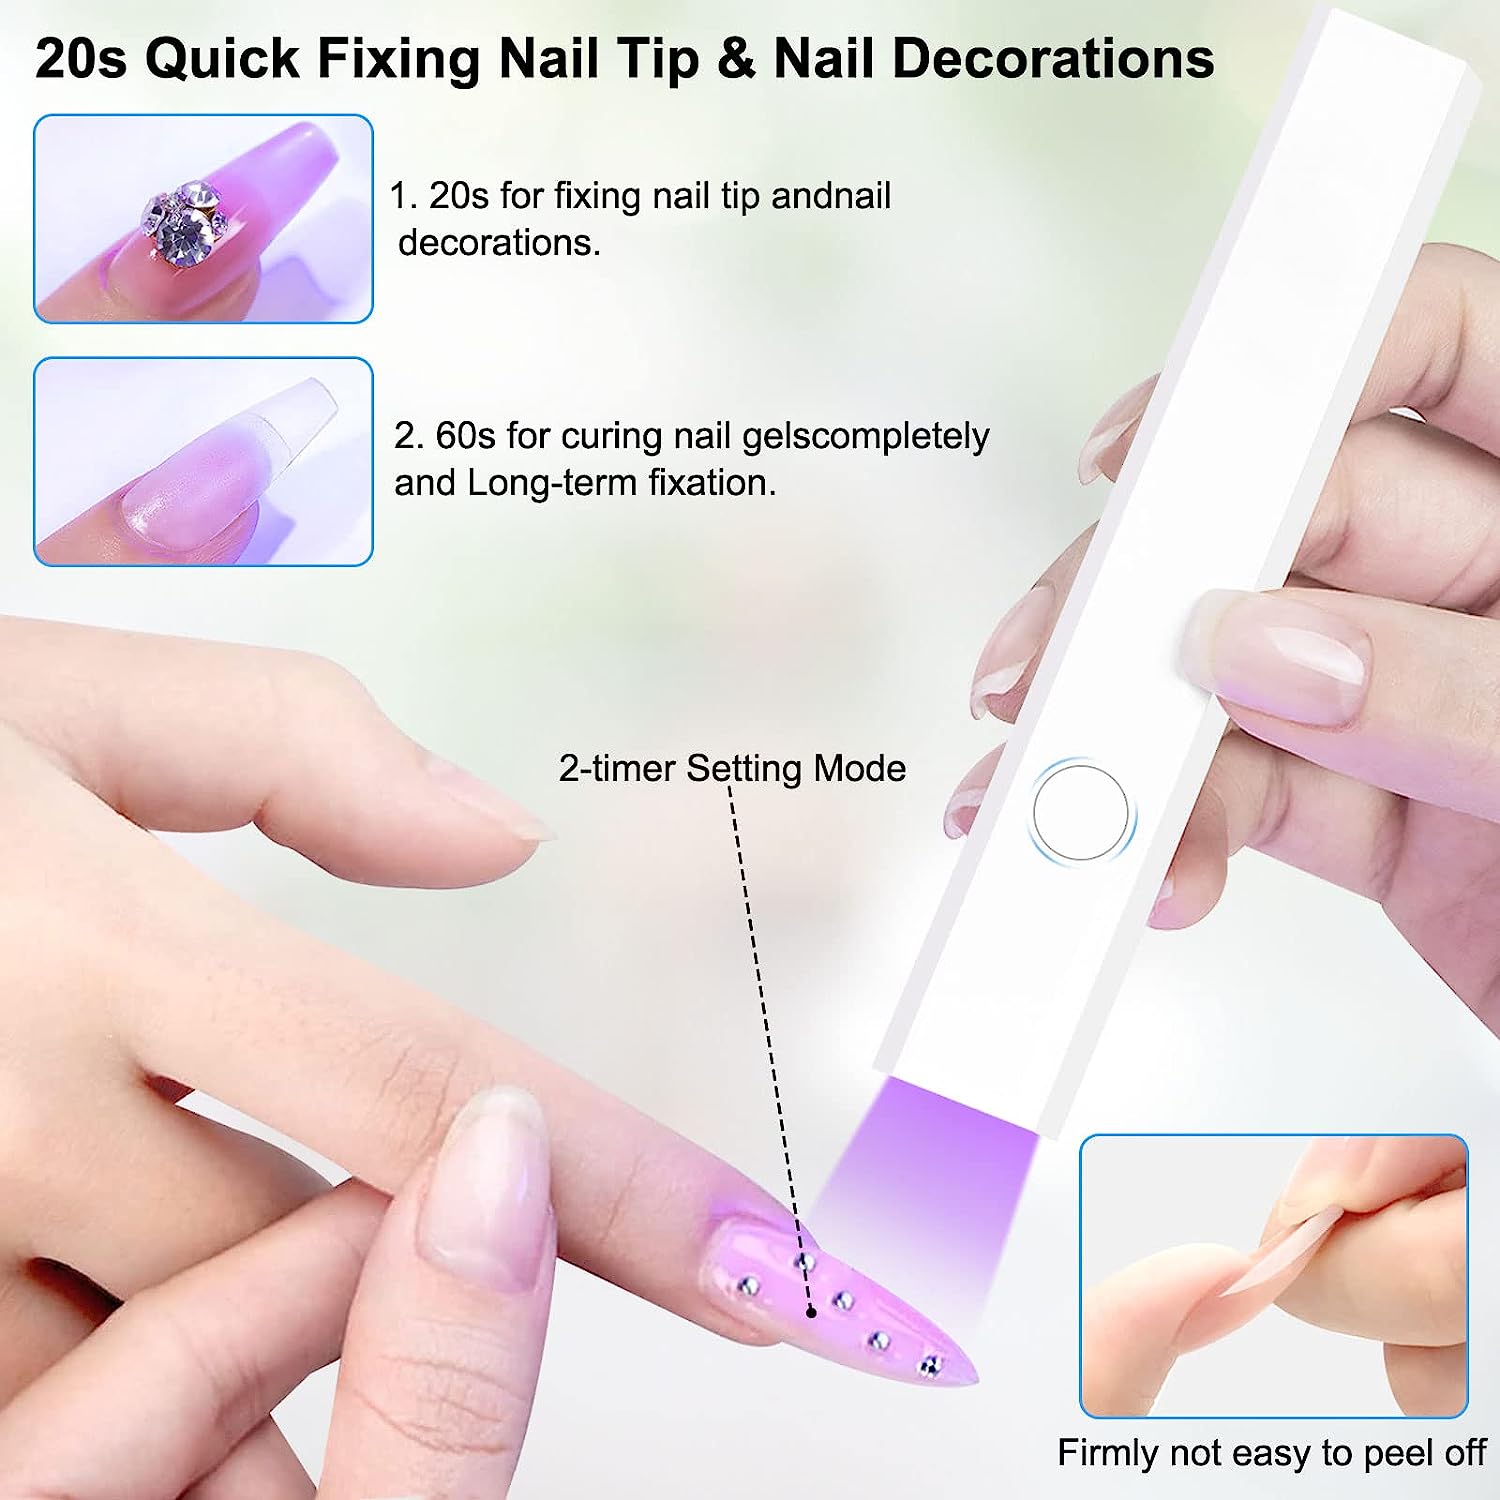 One Fire UV Light for Nails, 120W Nail Dryer, 42 India | Ubuy